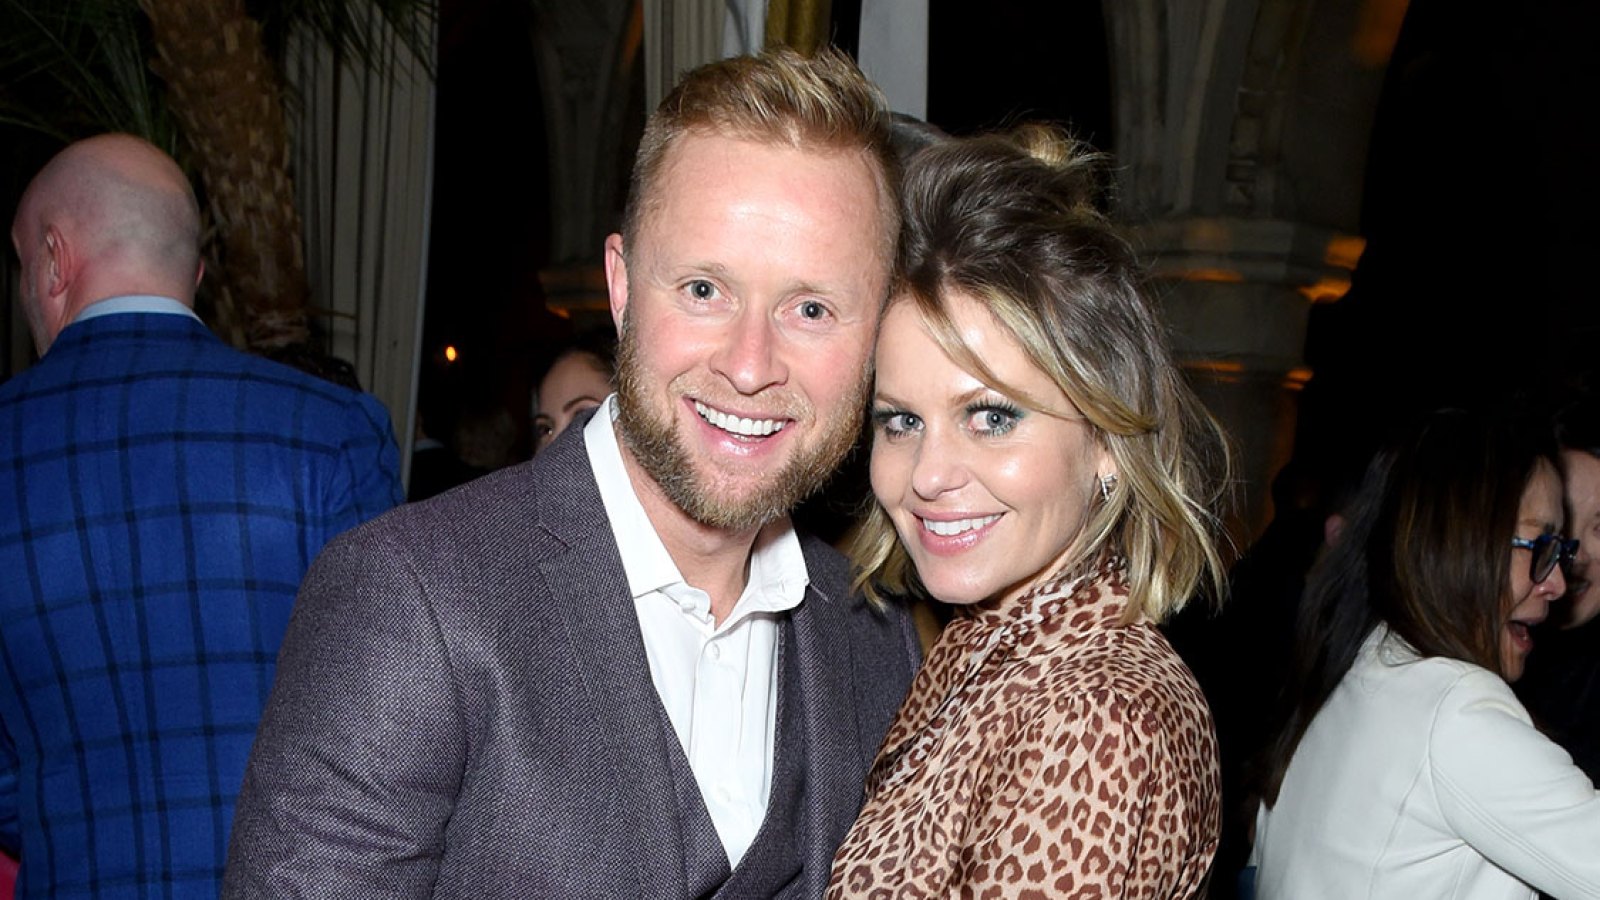 Candace Cameron and Valeri Bure Lasting Marriage